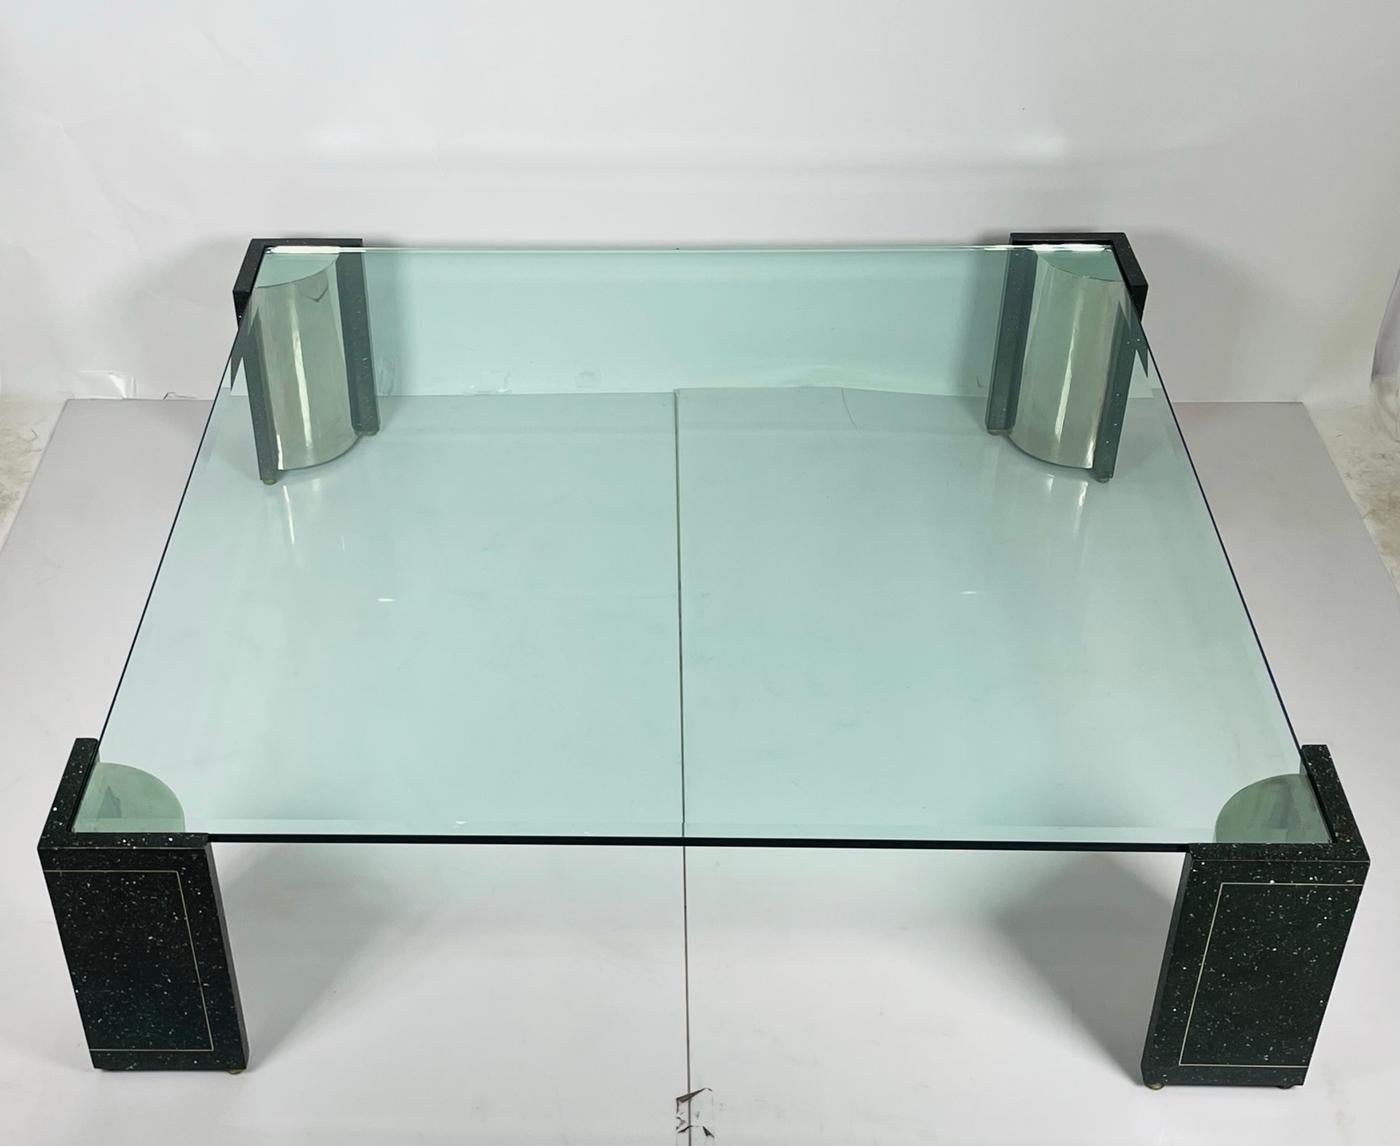 North American Terrazzo, Stainless Steel & Glass Coffee Table After Karl Springer, USA, 1970s For Sale